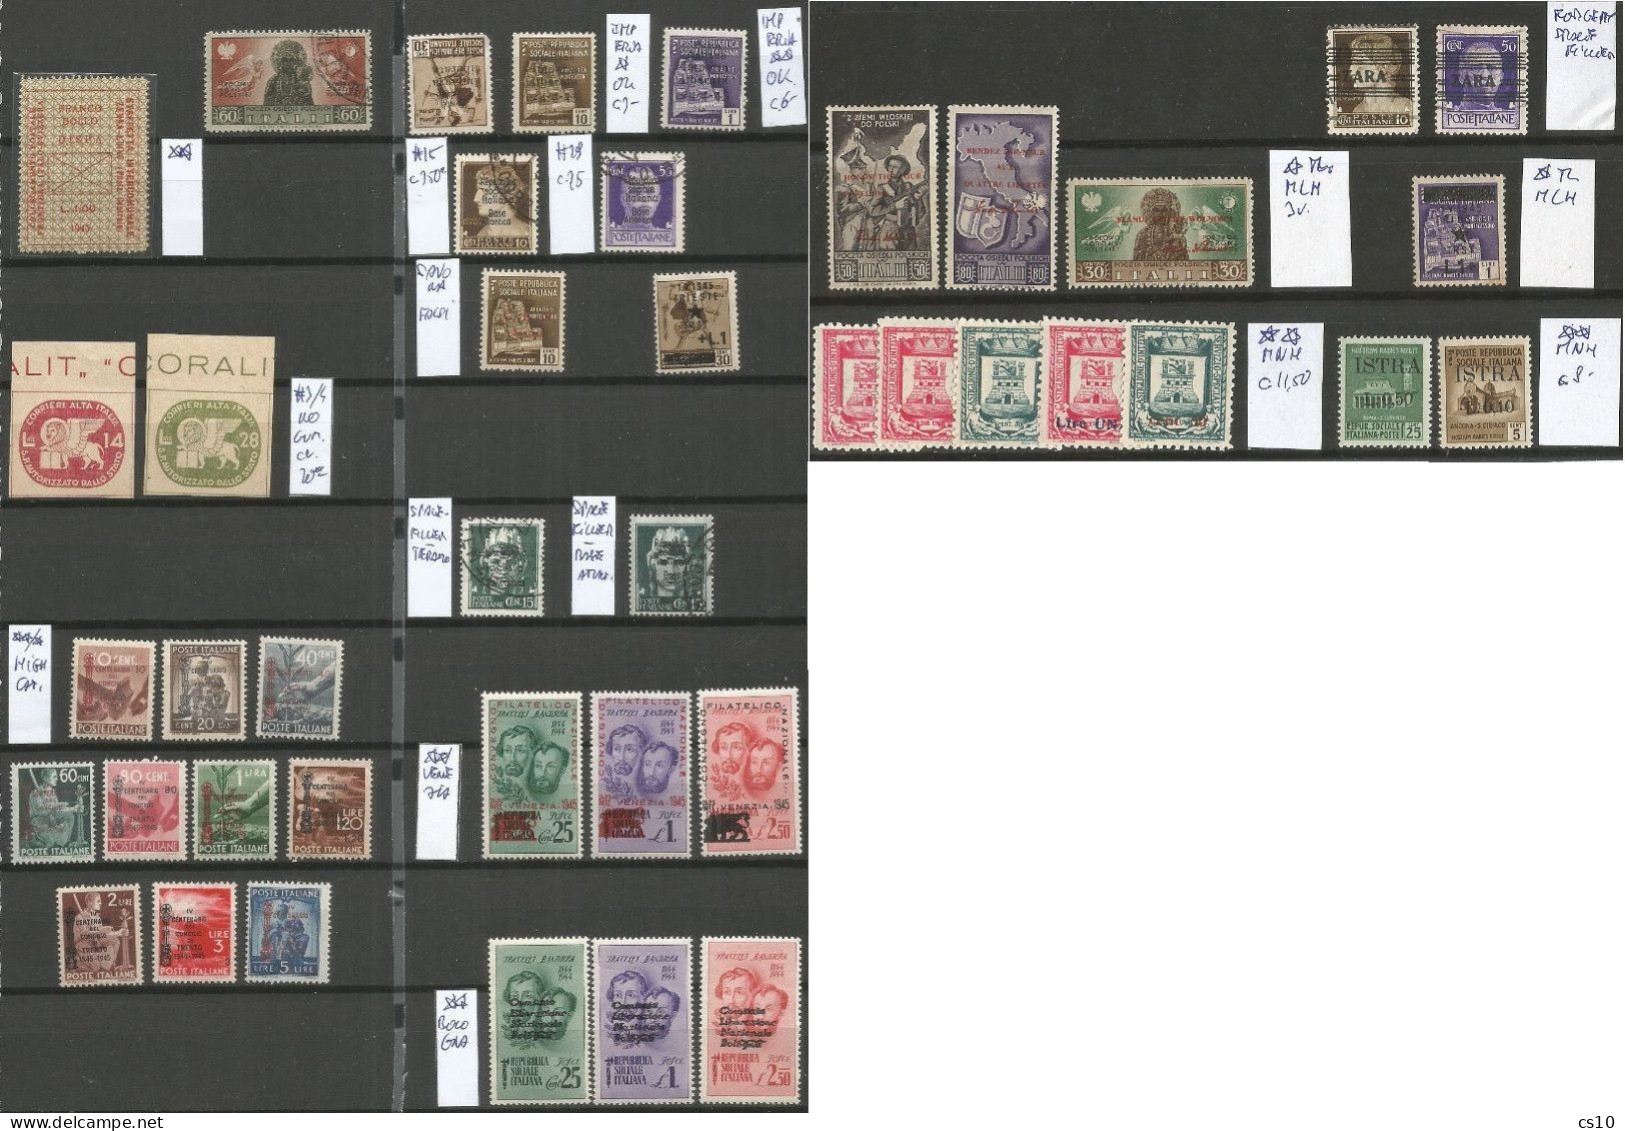 Italy Regency & Social Republic Local Issues Stamps Lot : Base Atlantica CORALIT Trento Imperia Trieste Venezia Bologna - National Liberation Committee (CLN)